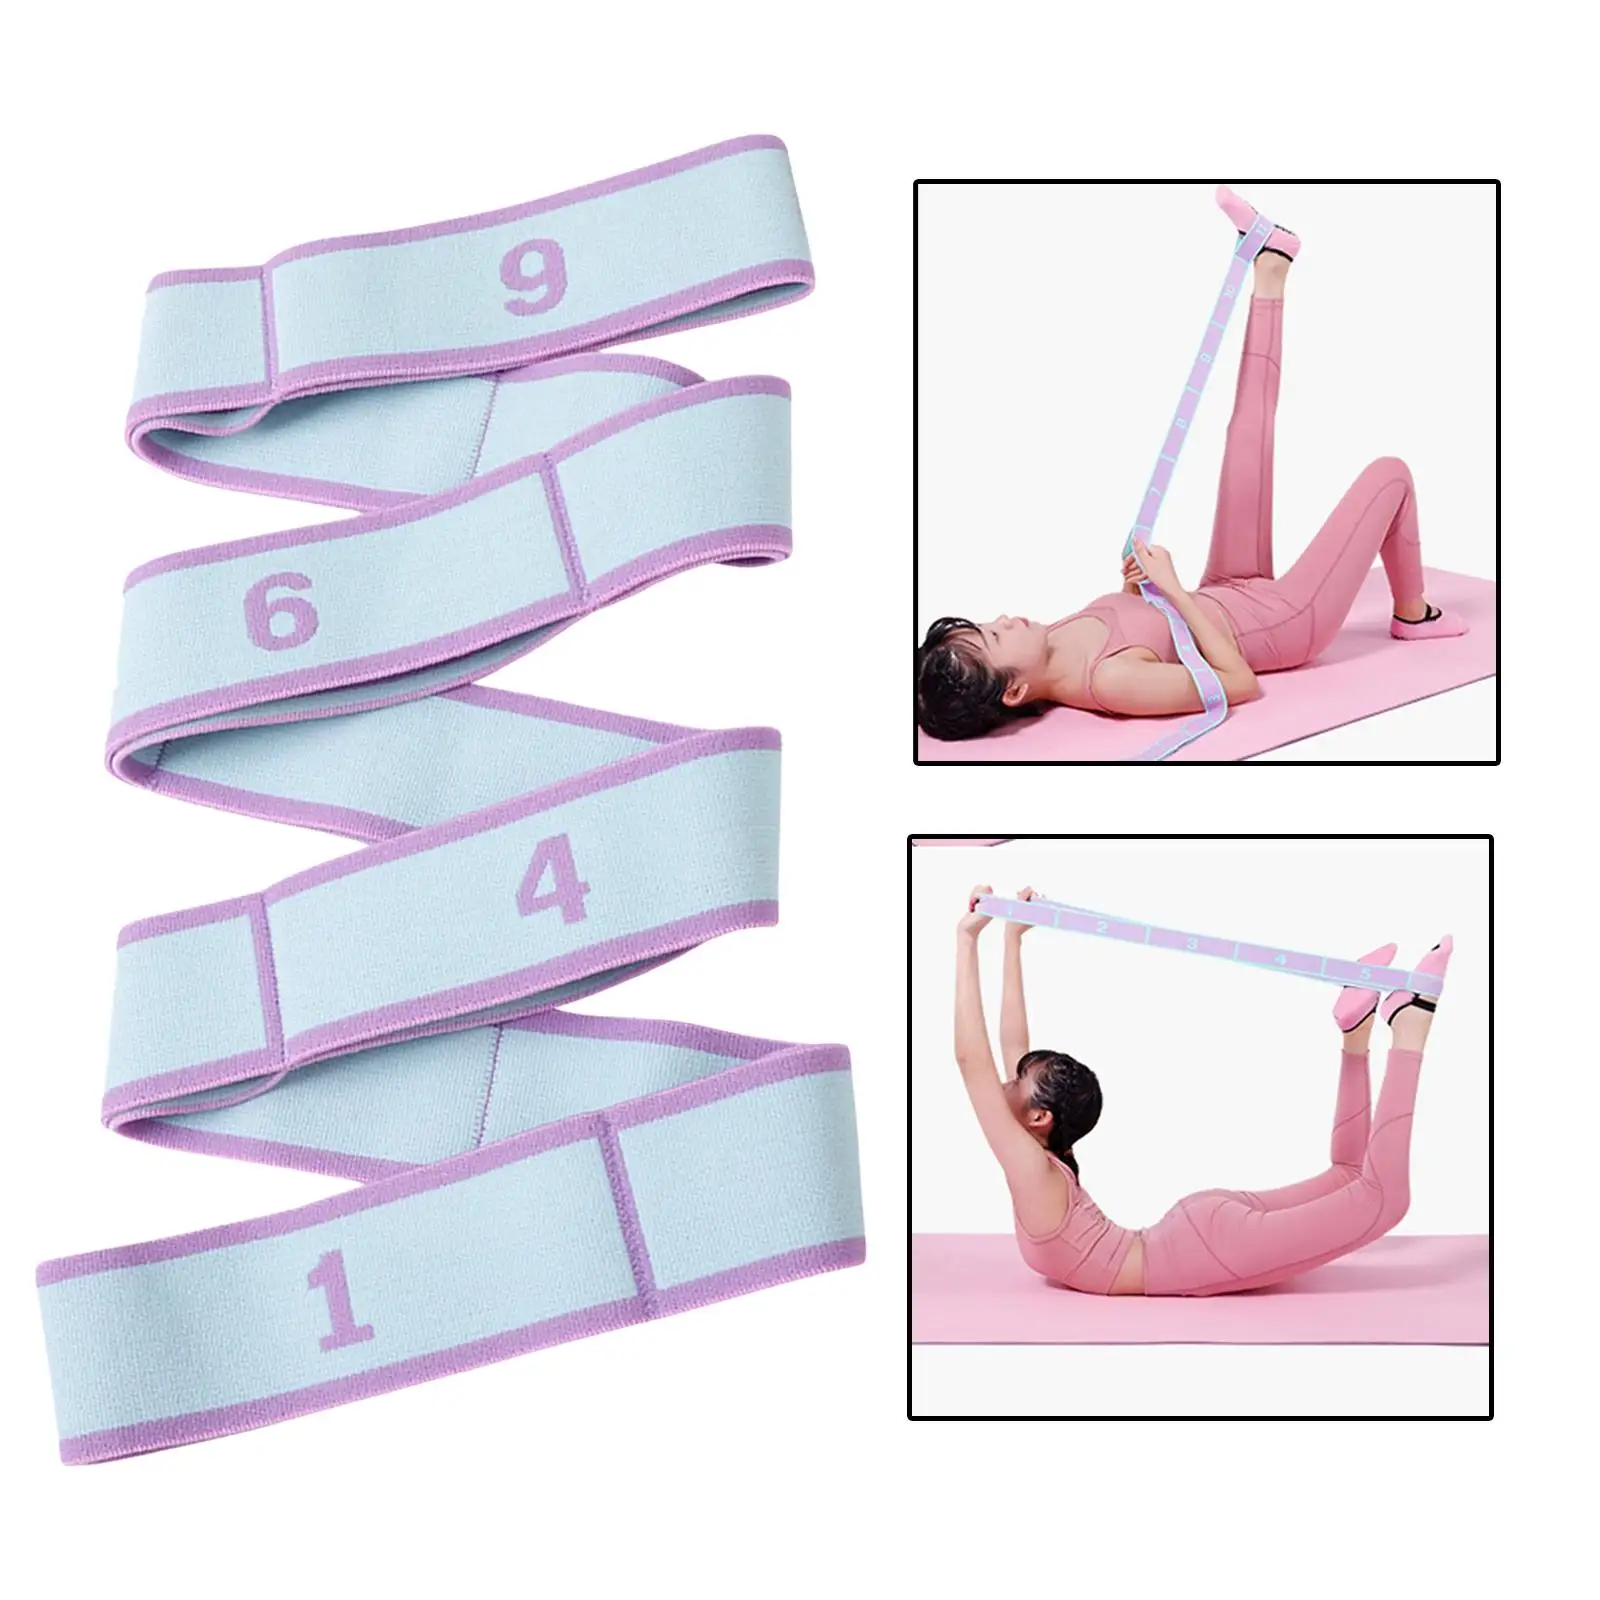 Yoga Strap Stretch Fitness Exercise Elastic Belt Gym Resistance Band Stretching Strap for Home Beginner  Dance Pilates